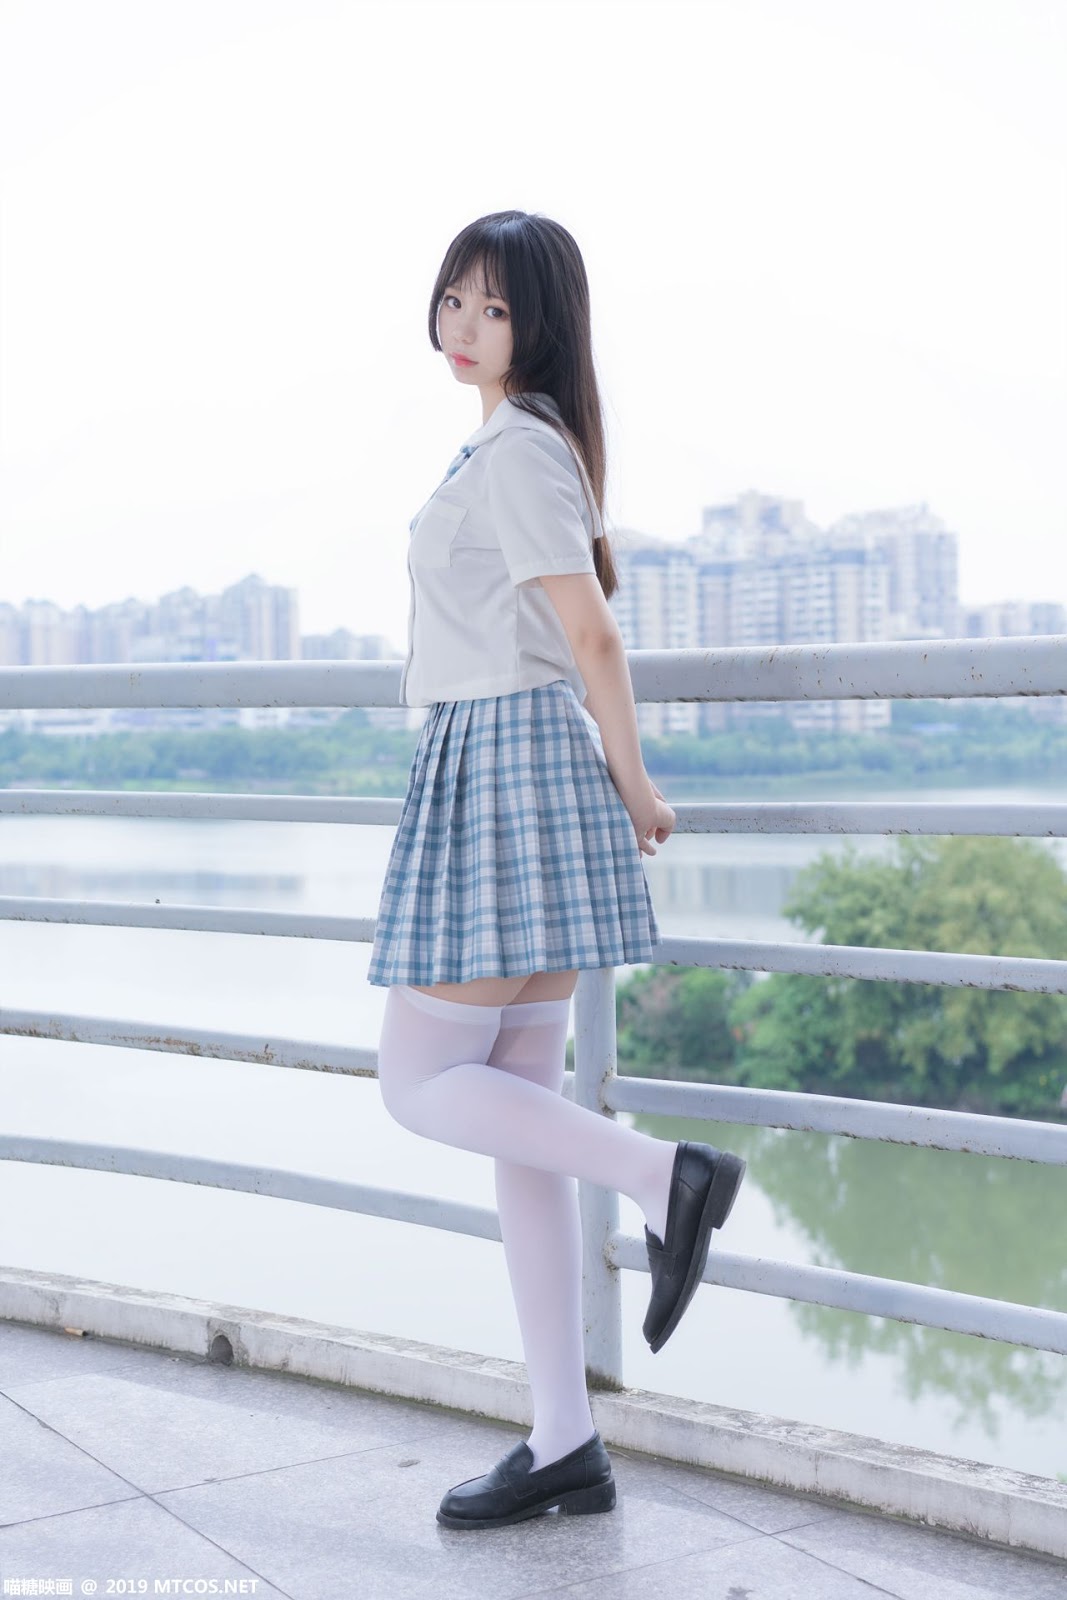 Image [MTCos] 喵糖映画 Vol.015 – Chinese Cute Model - White Shirt and Plaid Skirt - TruePic.net- Picture-15